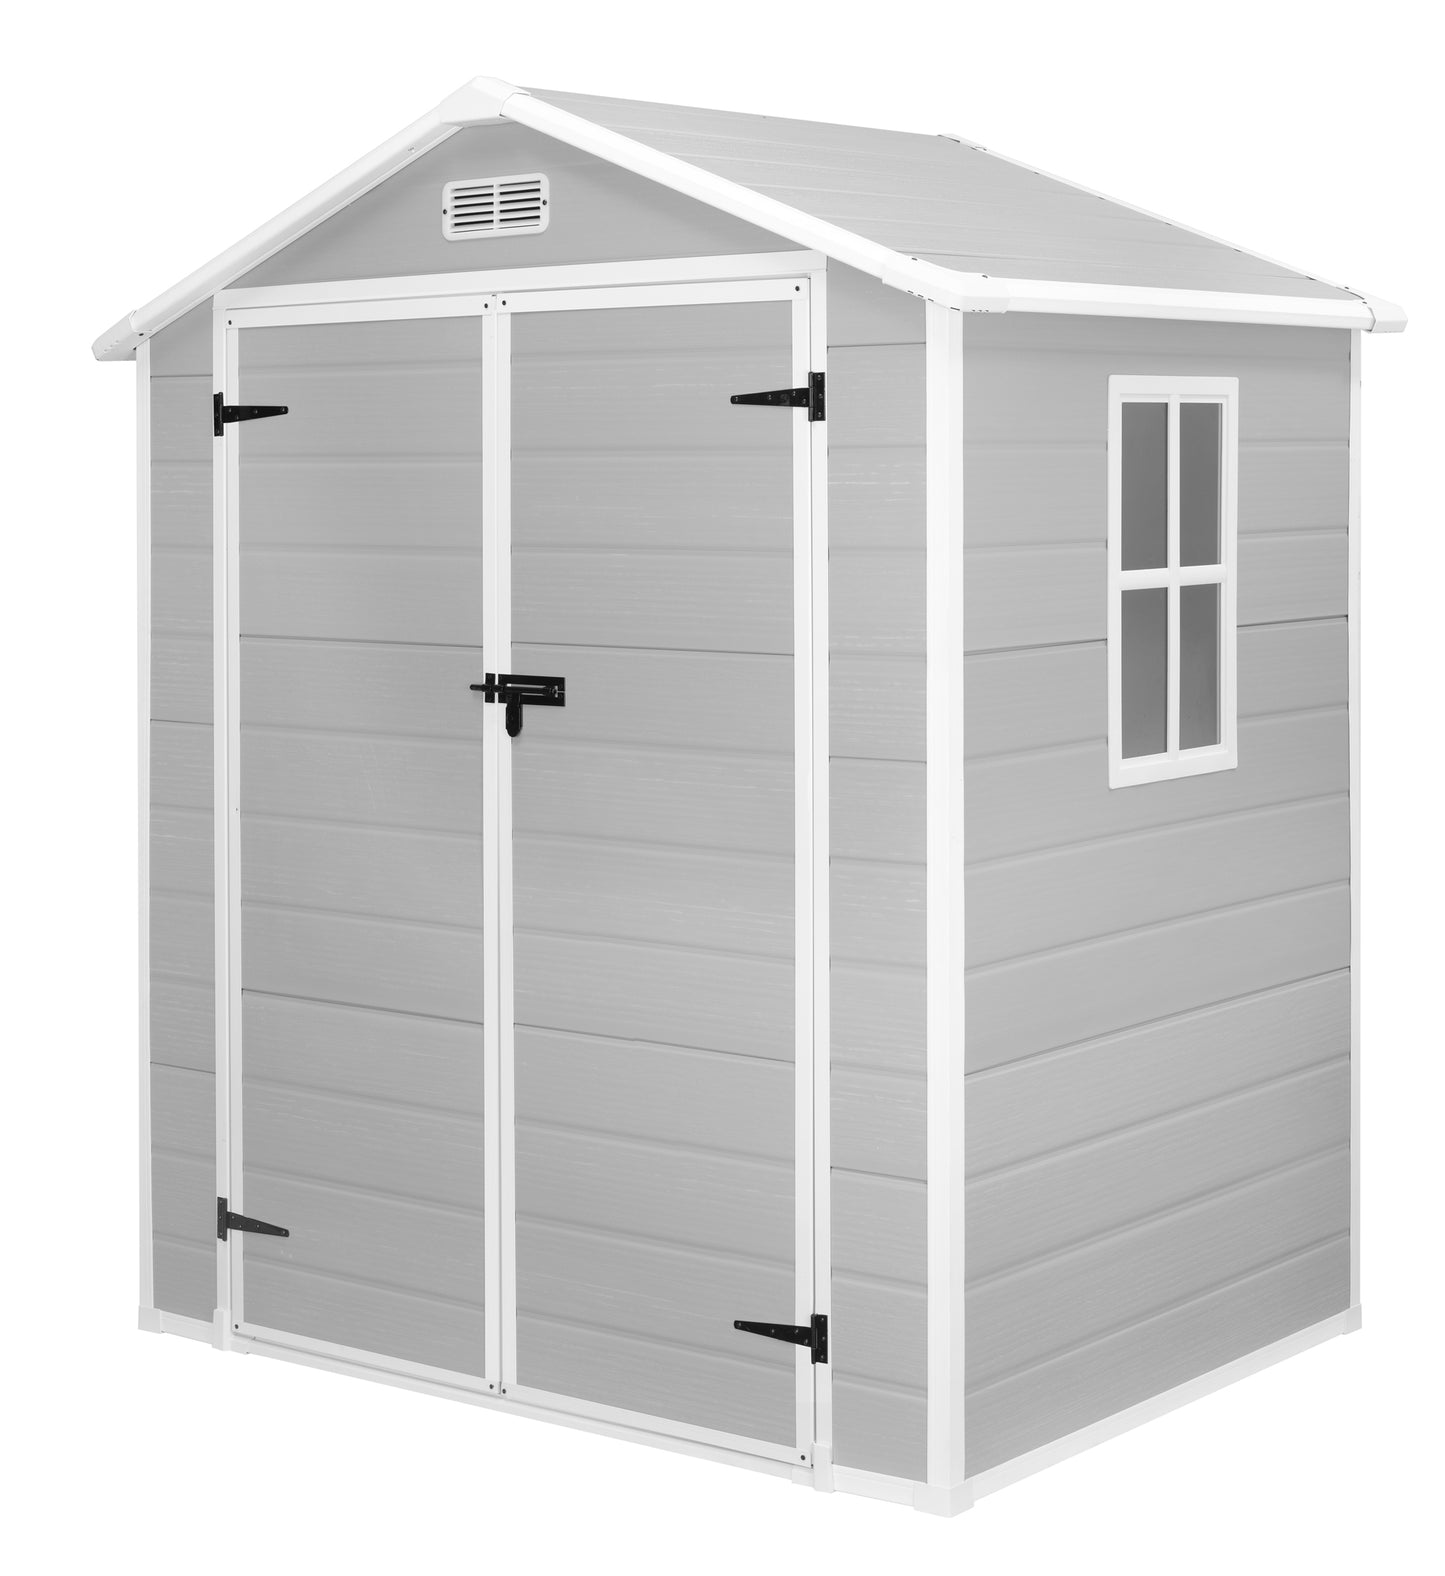 Syngar 6ft x 4ft Outdoor Plastic Storage Shed, All-Weather Tool Shed with Reinforced Floor, Pitched Roof and Double Lockable Doors, Large Garden Shed for Bikes, Lawnmowers, Trash Cans, Grey & White